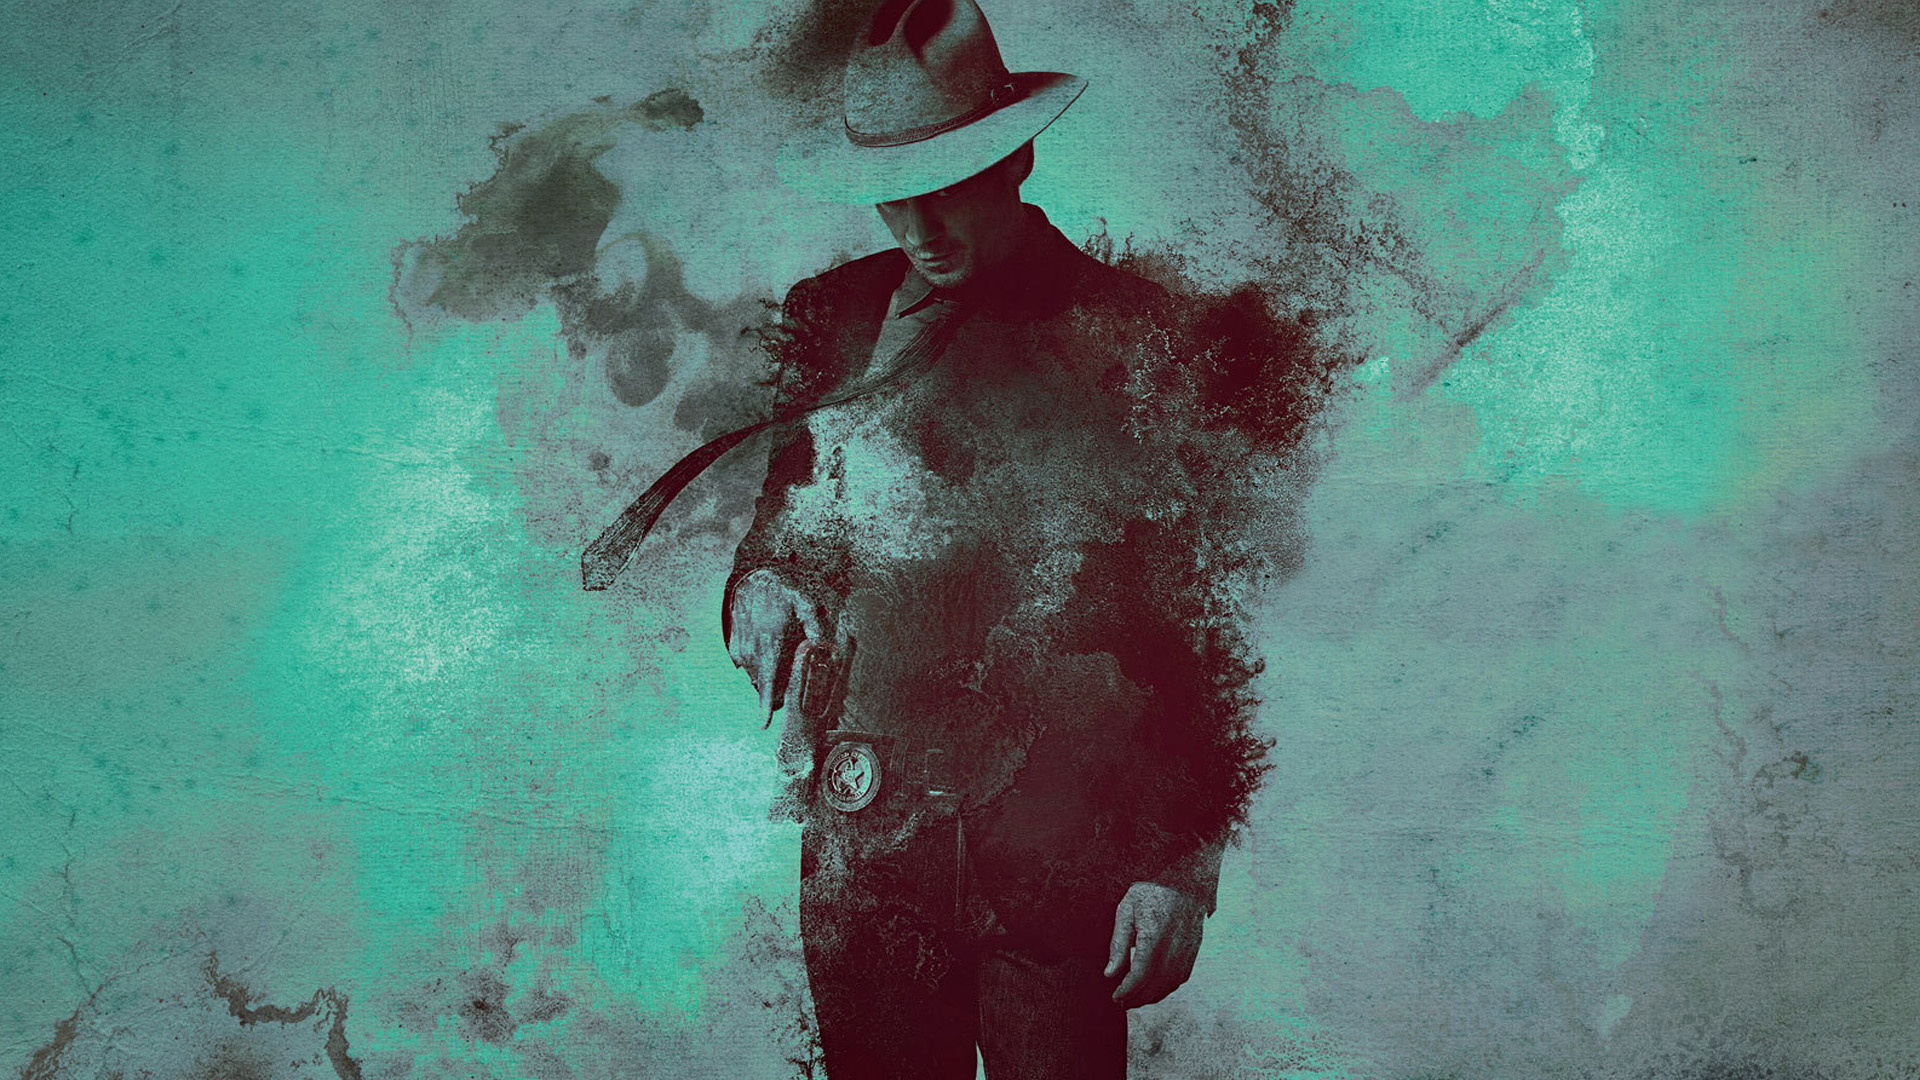 Justified TV Series, Exclusive wallpapers, High-quality pictures, Immersive experience, 1920x1080 Full HD Desktop